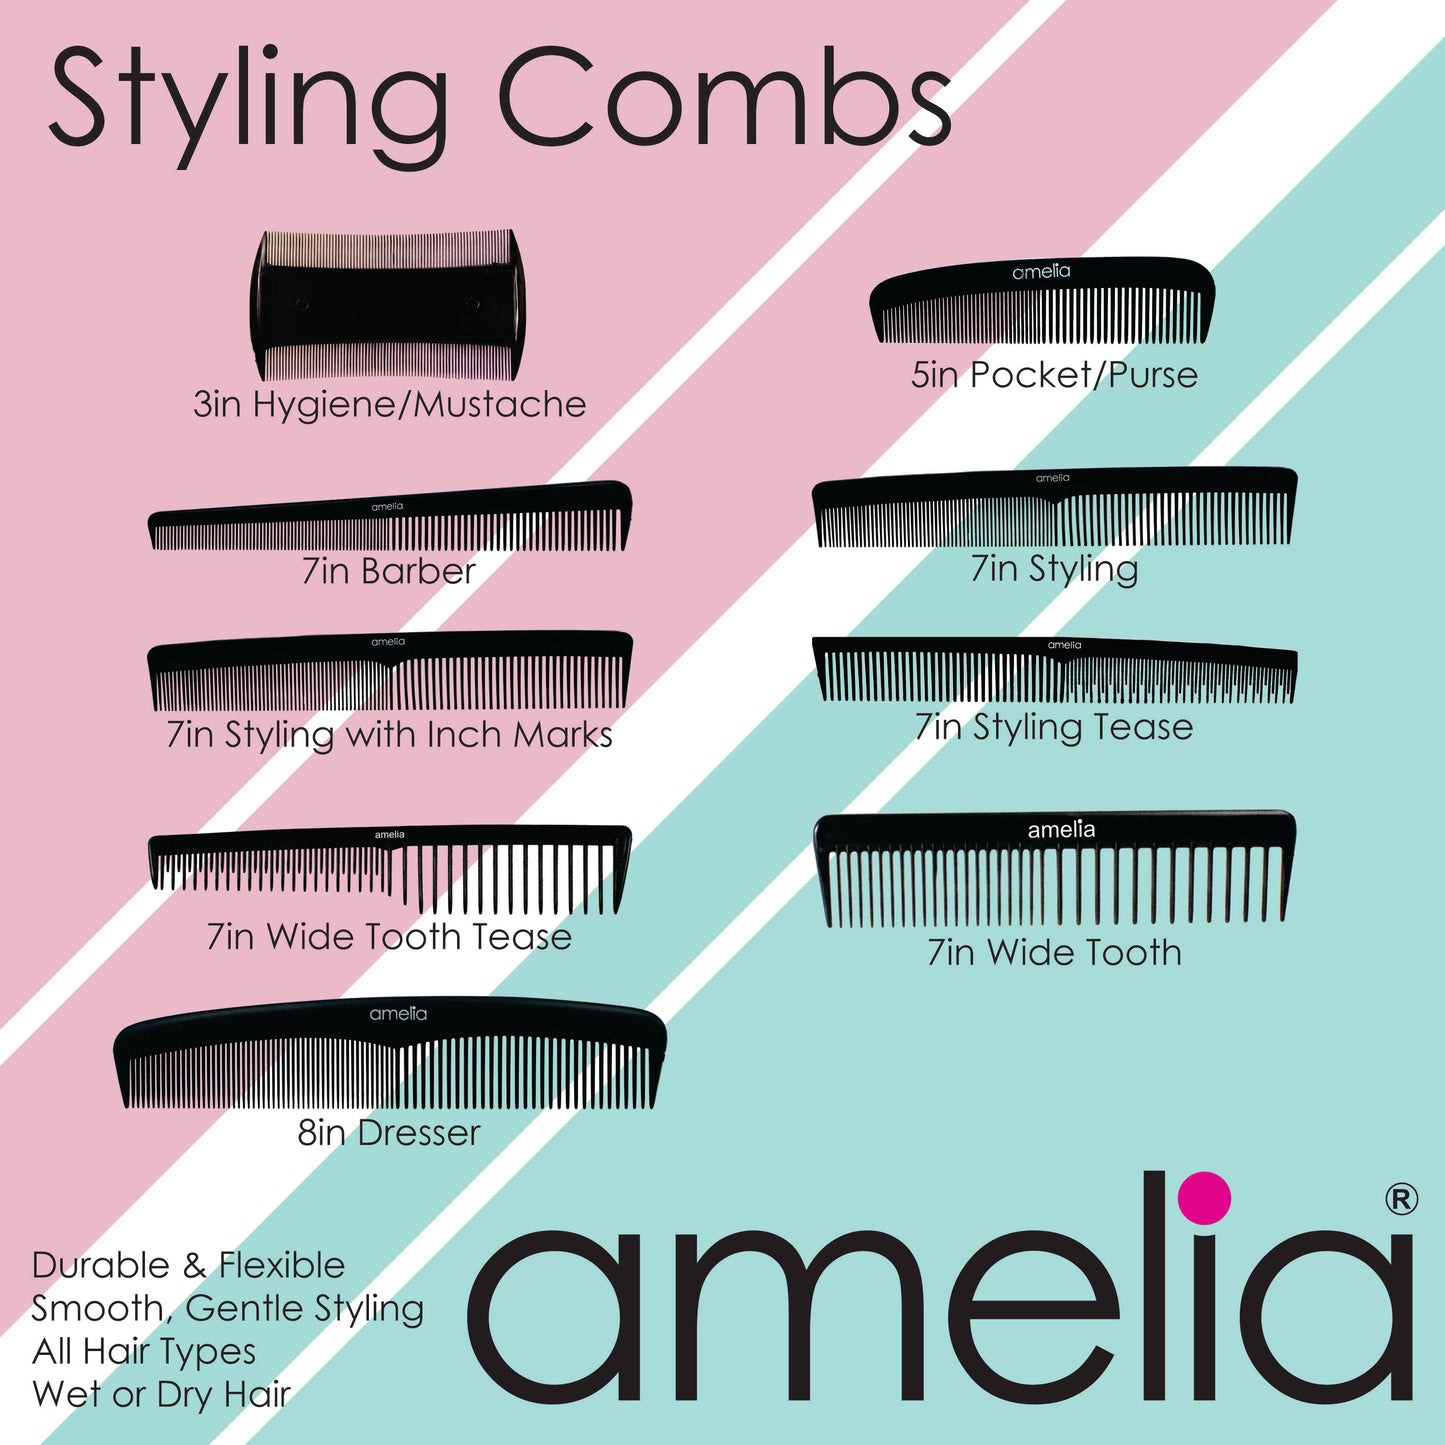 Amelia Beauty, 7in Black Plastic Styling Comb, Made in USA, Professional Grade Pocket Hair Comb, Blending, Cutting Portable Salon Barber Shop Everyday Styling Cutting Hair Styling Tool, 2 Pack